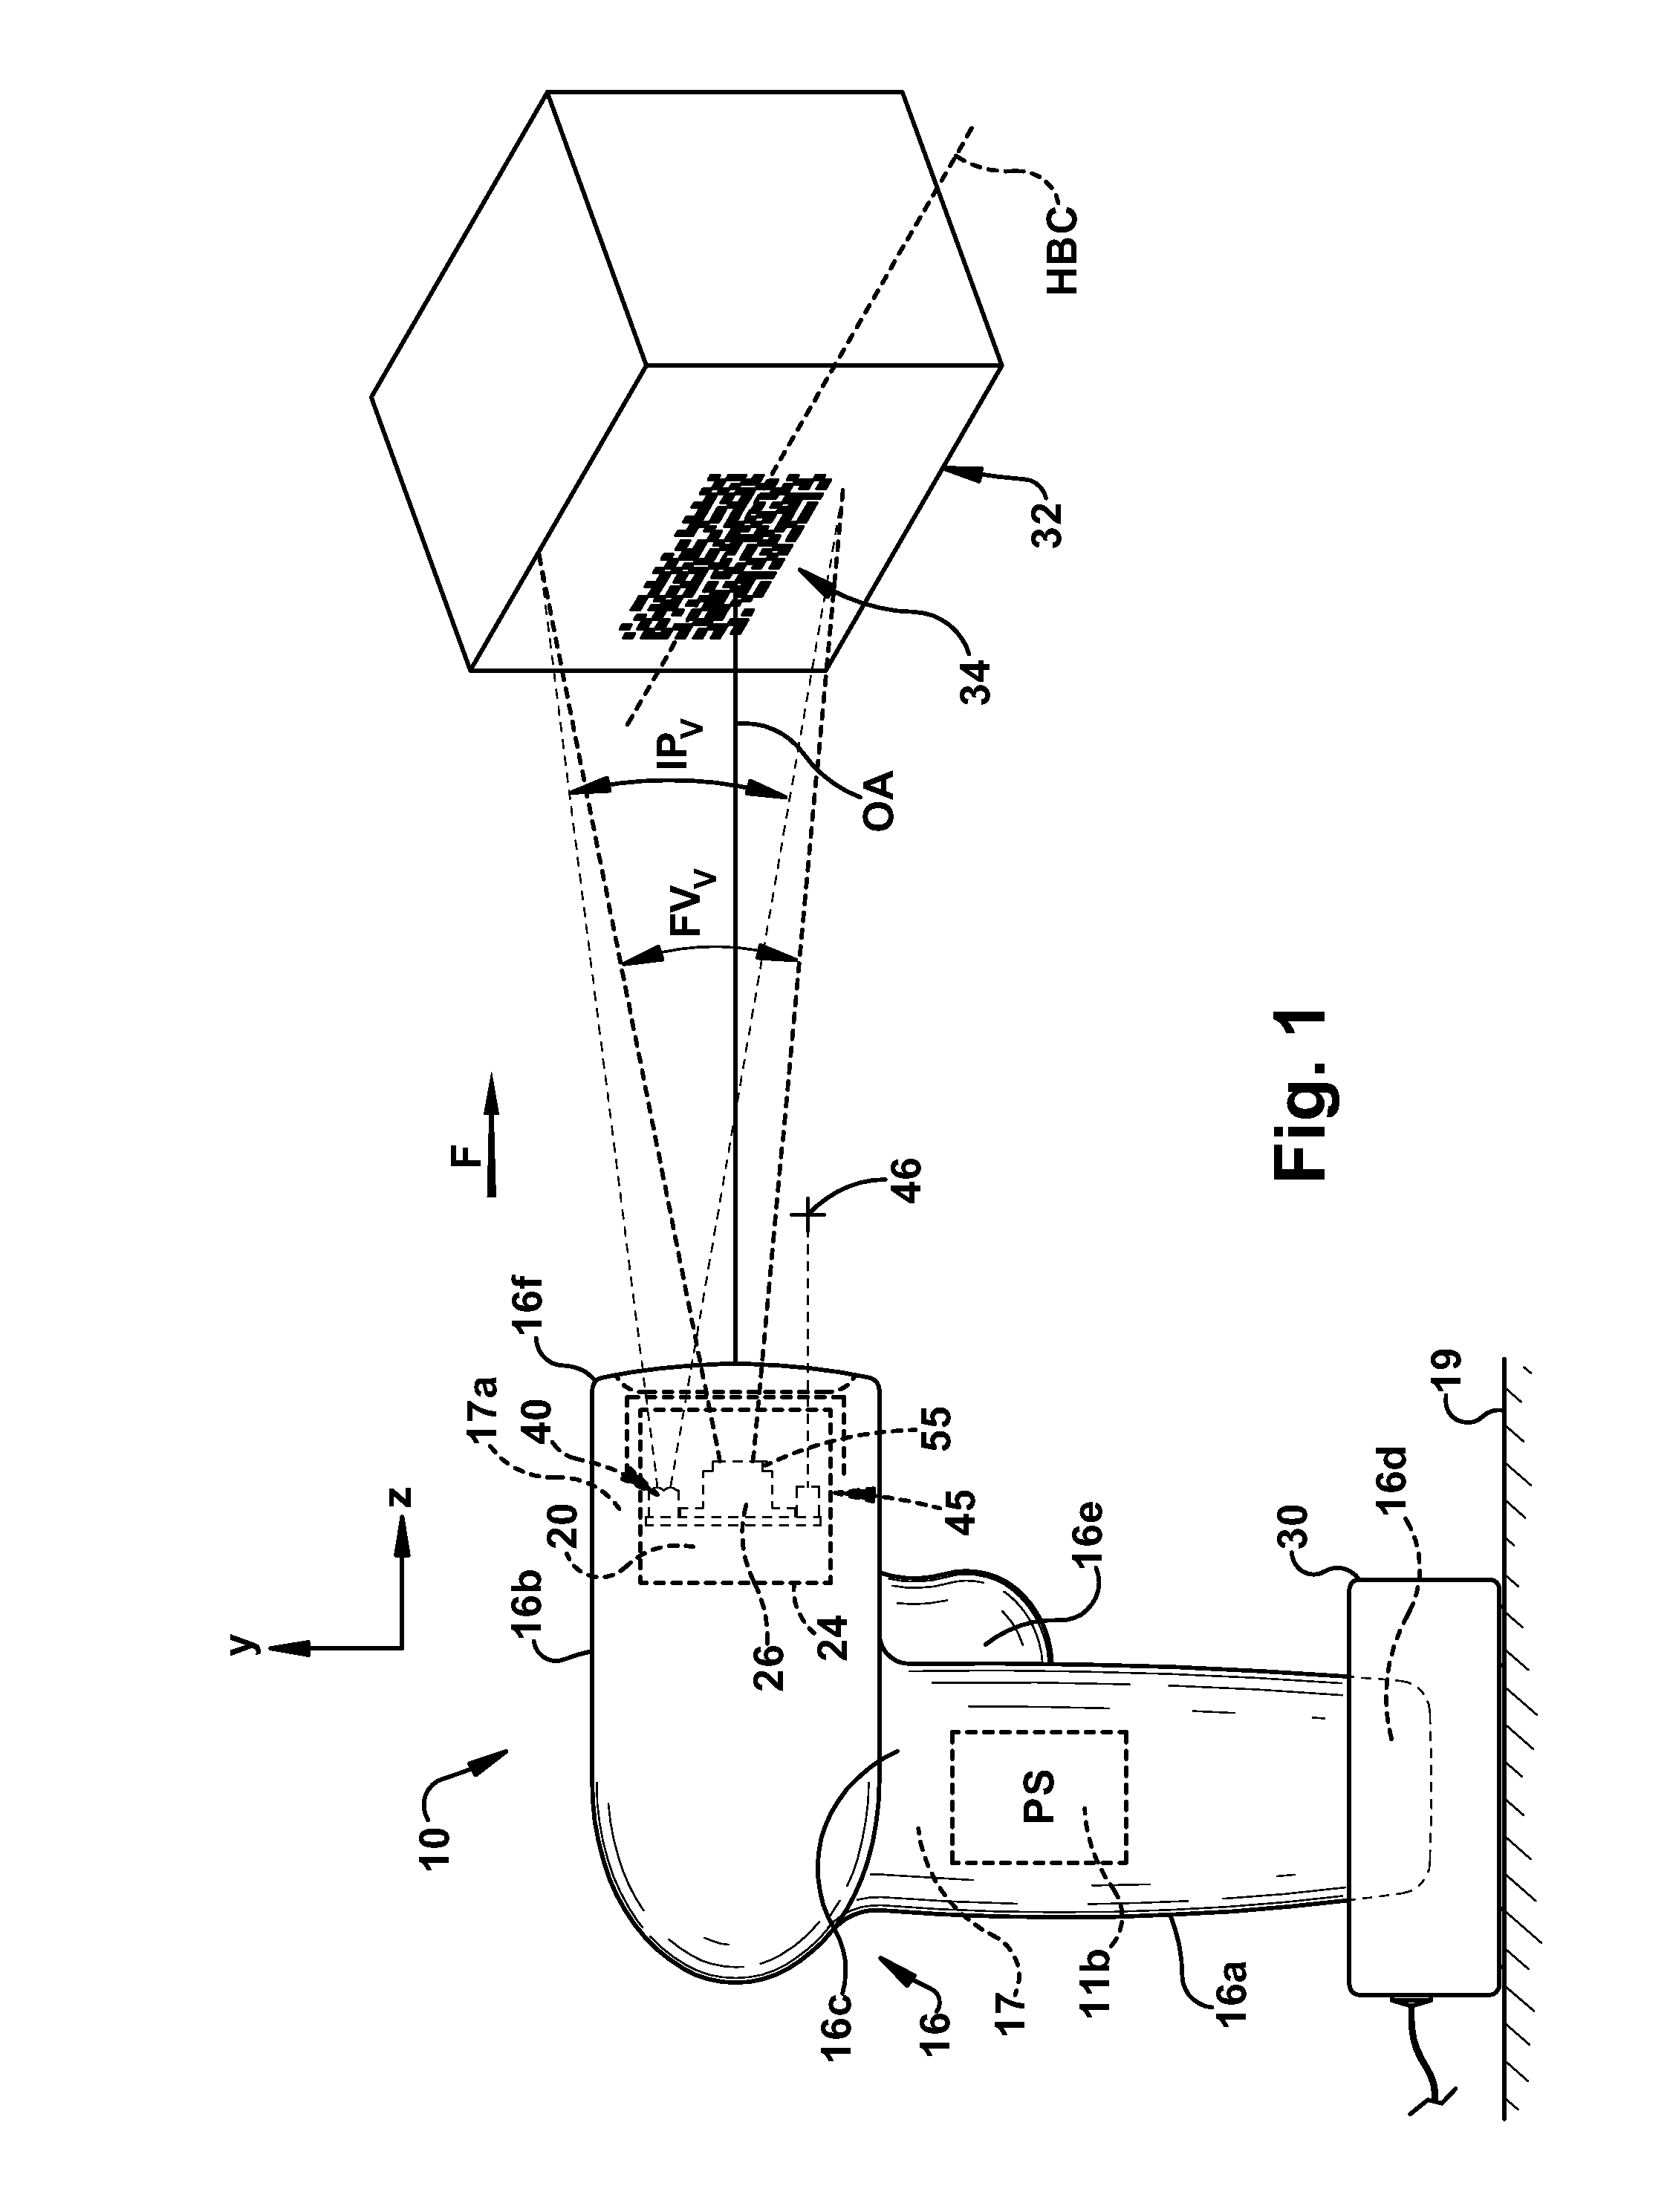 Automatic Region of Interest Focusing for an Imaging-Based Bar Code Reader